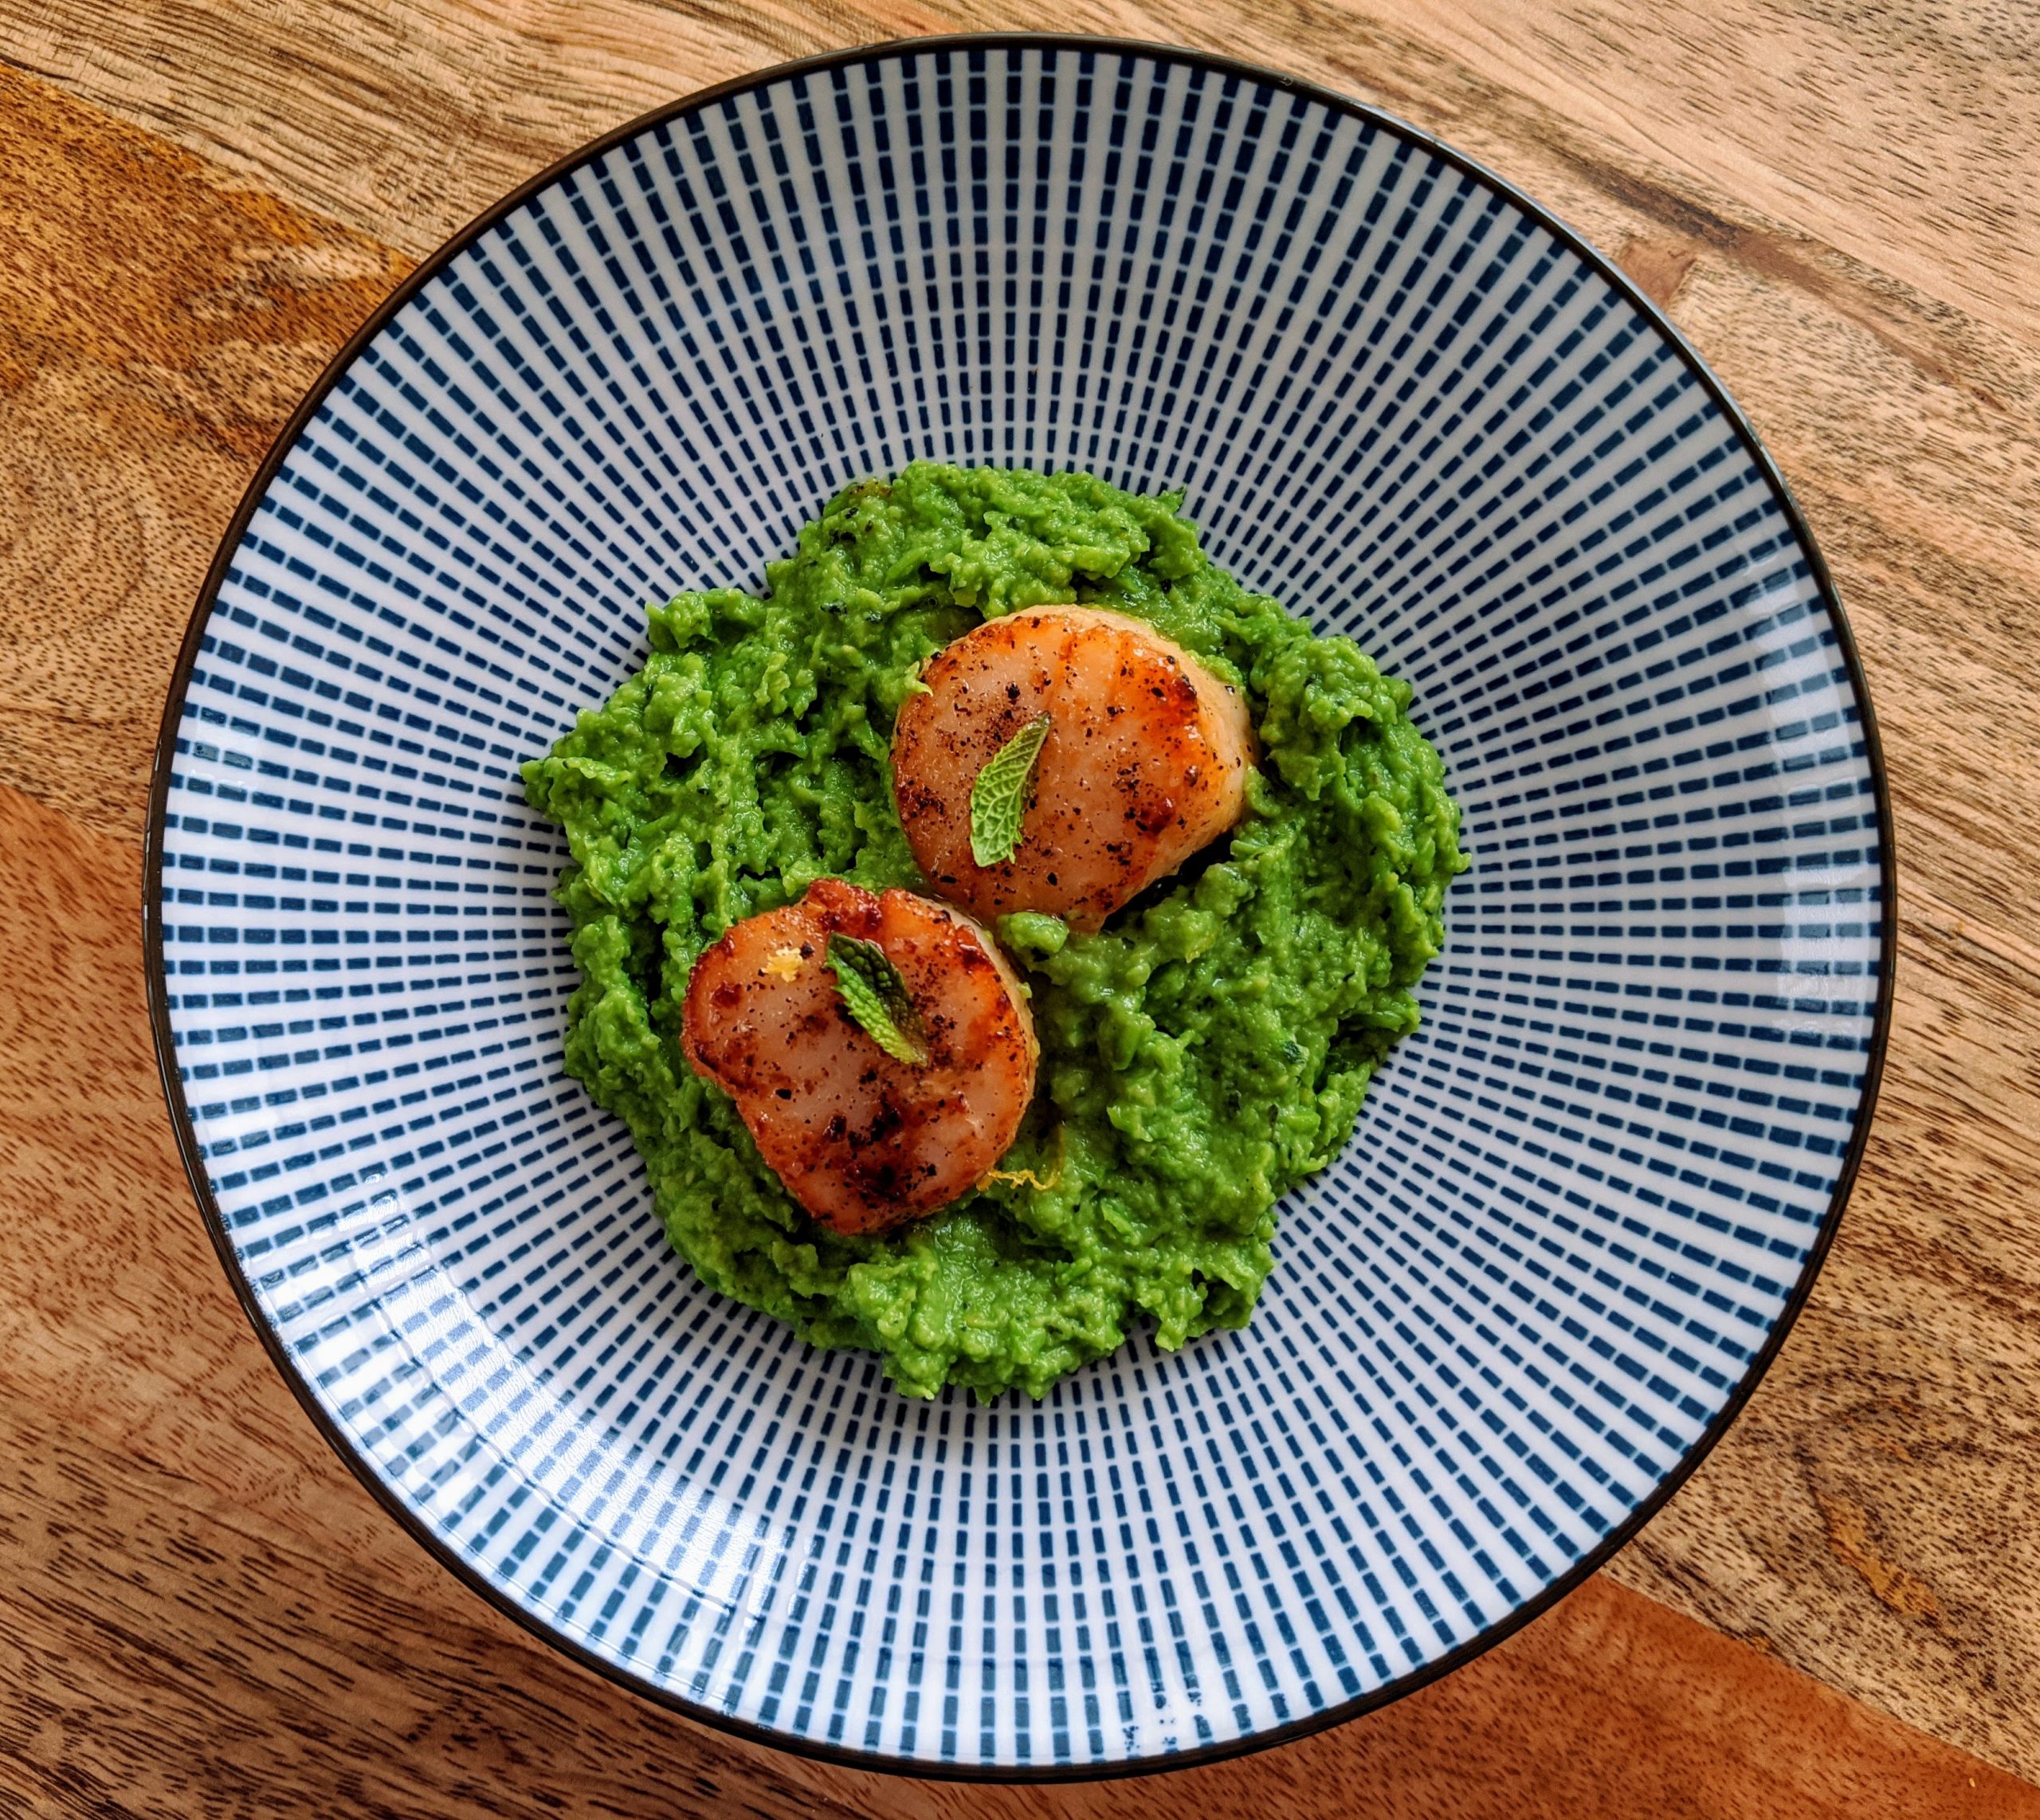 Two seared scallops on top of a circular bed of mint and pea purée; garnished with fresh mint leaves. This appetizer sized portion is served on a blue and white geometric print side plate.